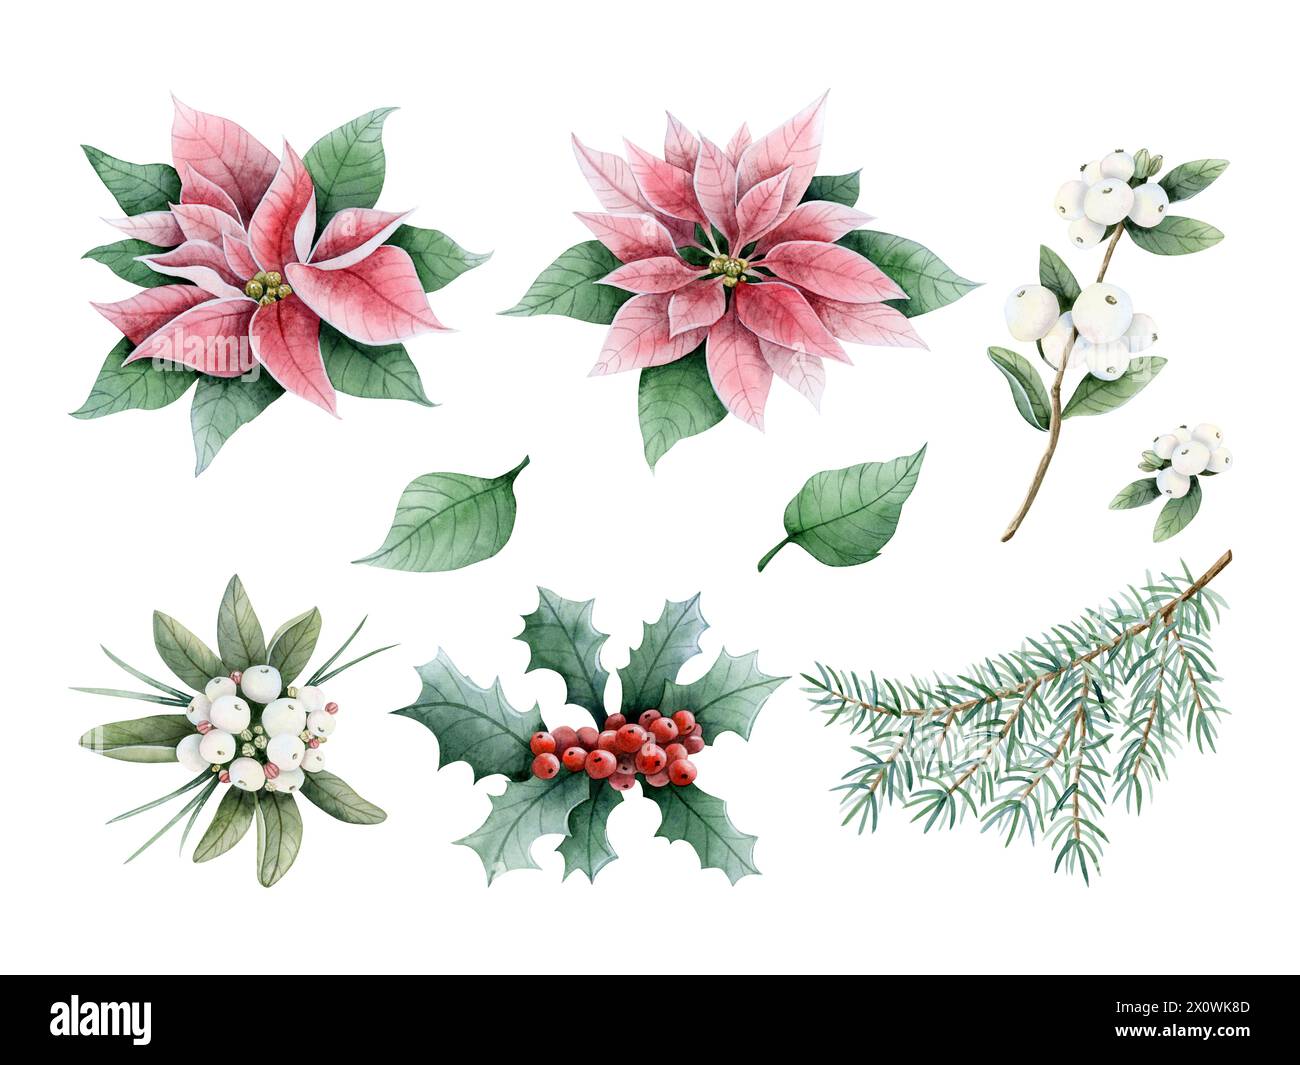 Christmas winter florals, plants, berries and fir branches watercolor illustration set. Poinsettia, snowberry and holly Stock Photo